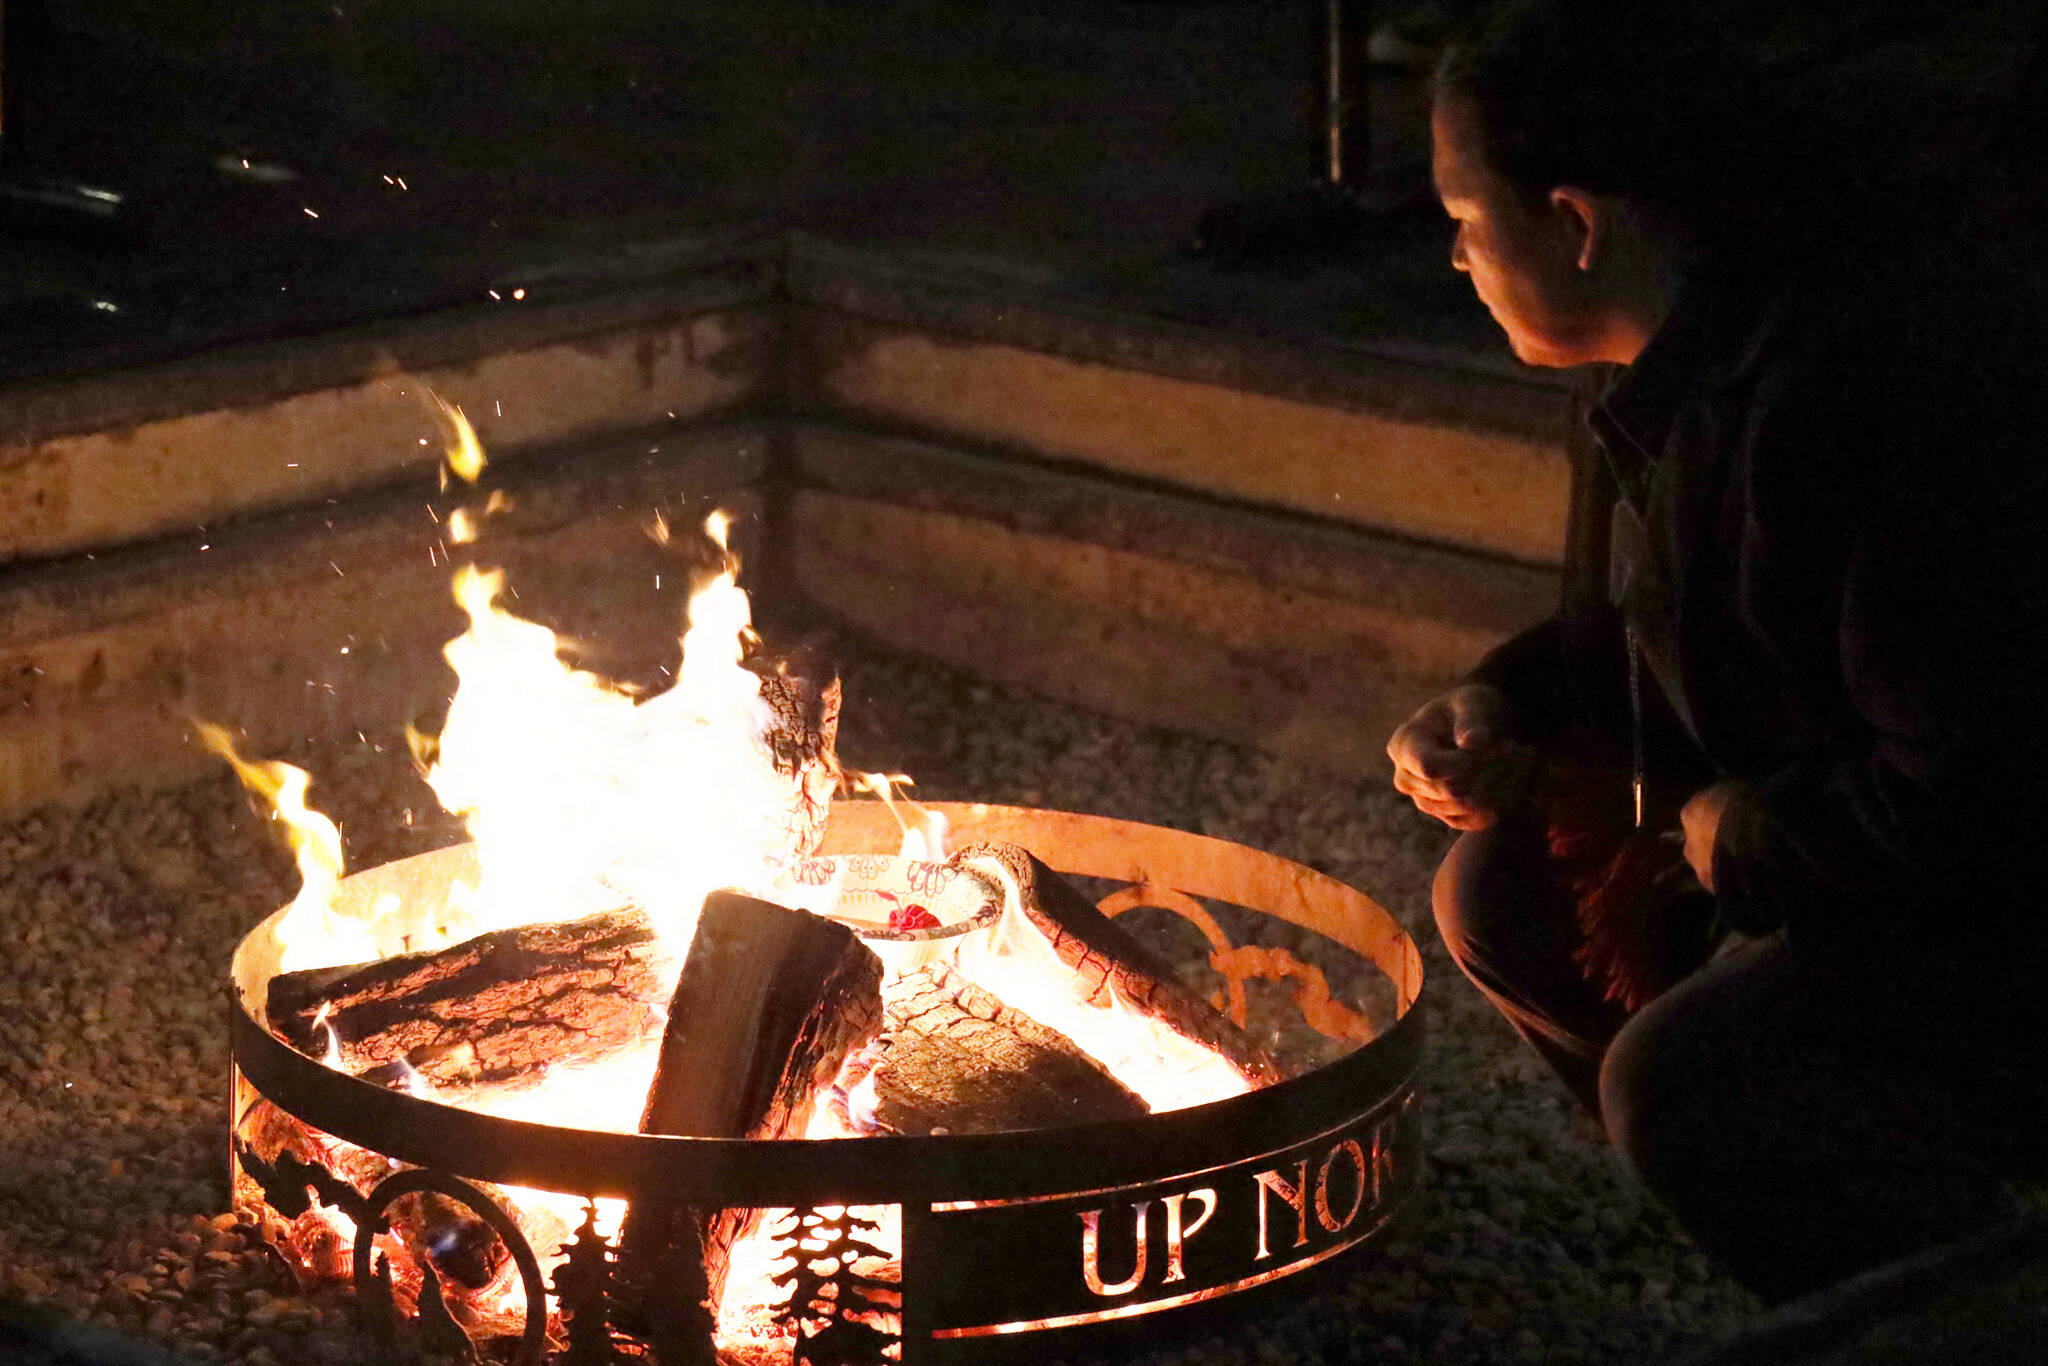 Clarise Larson / Juneau Empire 
X̱’unei Lance Twitchell sits next to a fire at a celebration of life ceremony hosted at the University of Southeast Alaska’s Noyes Pavilion in honor of late UAS professor Sol Neely Saturday evening.